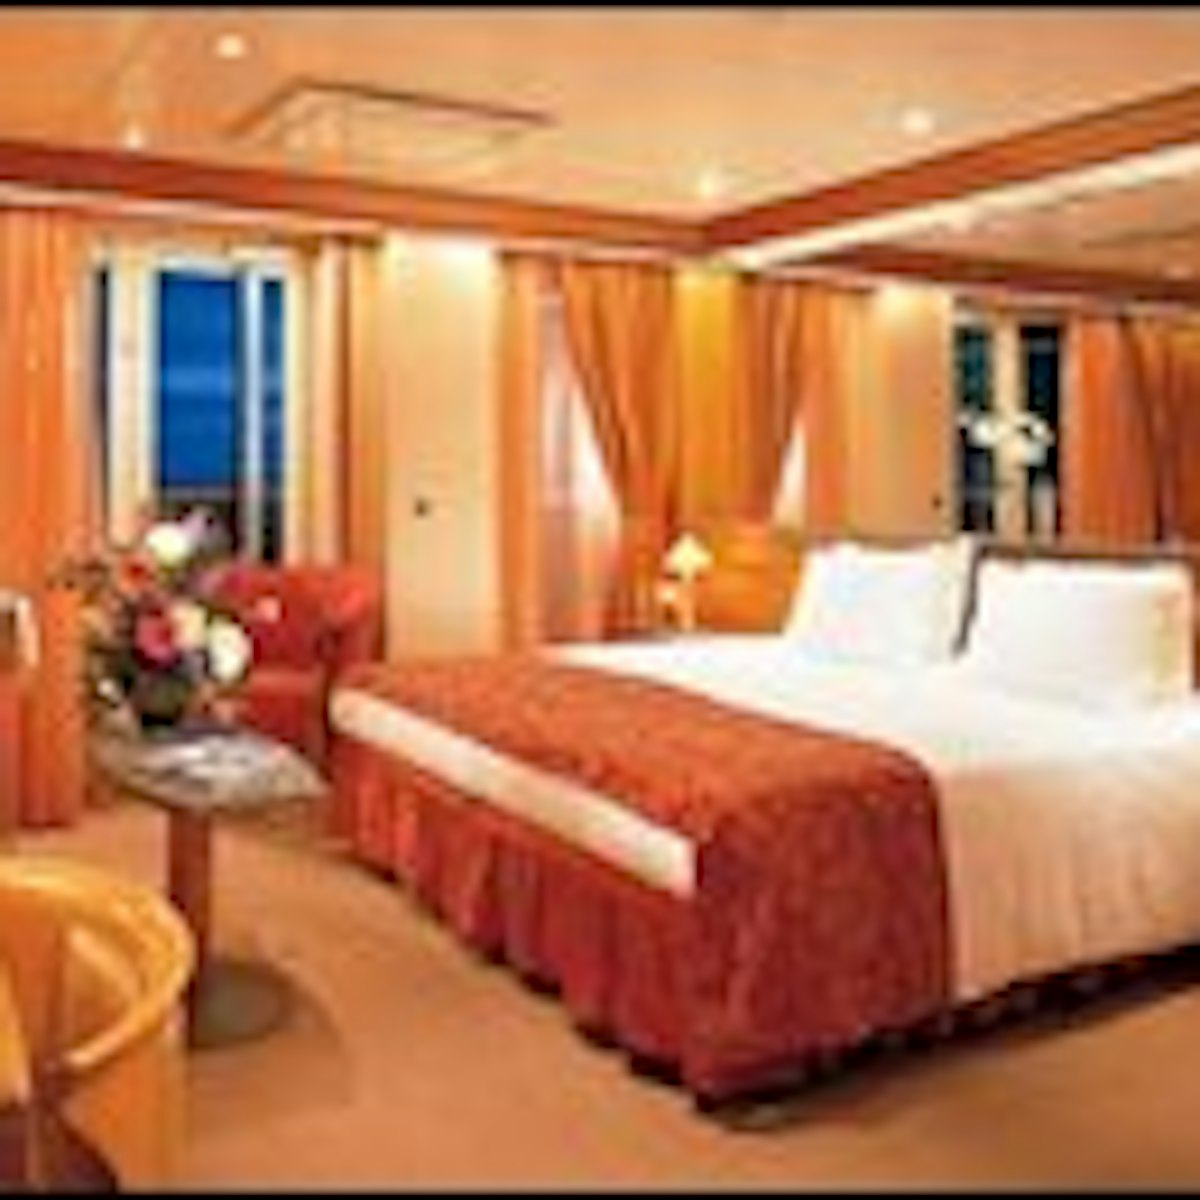 Best Carnival Miracle Suite Cabin Rooms & Cruise Cabins